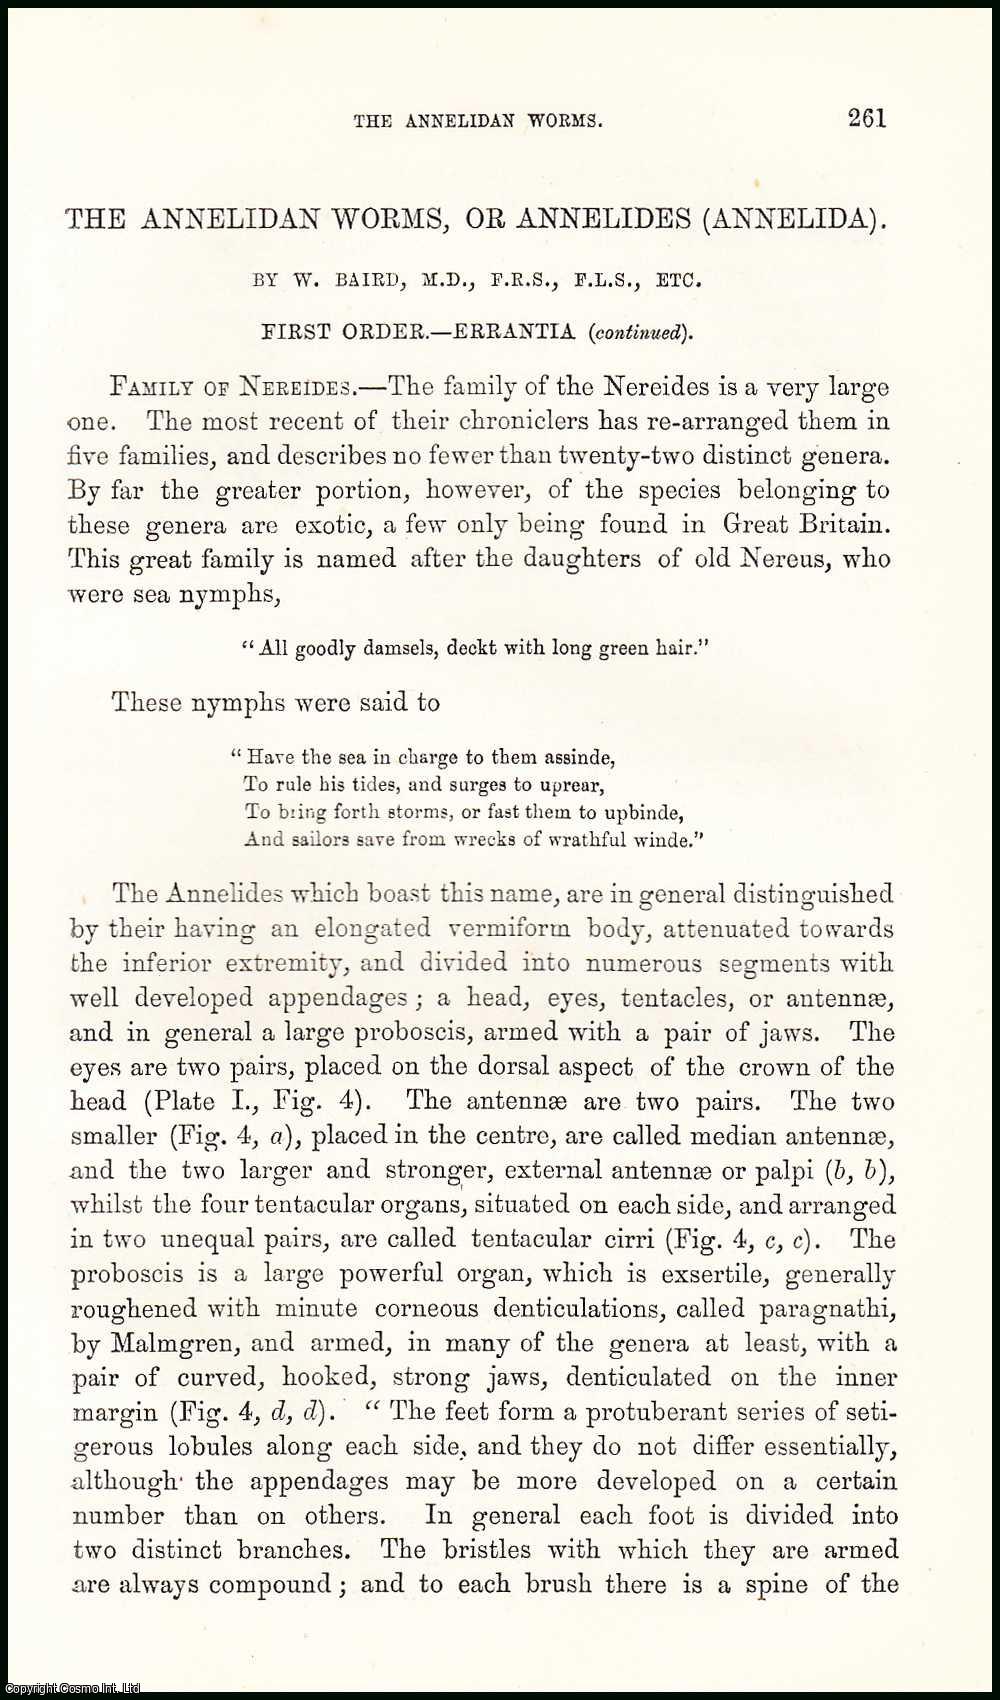 W. Baird, M.D., F.R.S., F.L.S. - Errantia (part 2) : The Annelidan Worms, or Annelides (Annelida). An uncommon original article from the Student and Intellectual Observer of Science Literature & Art, 1869.